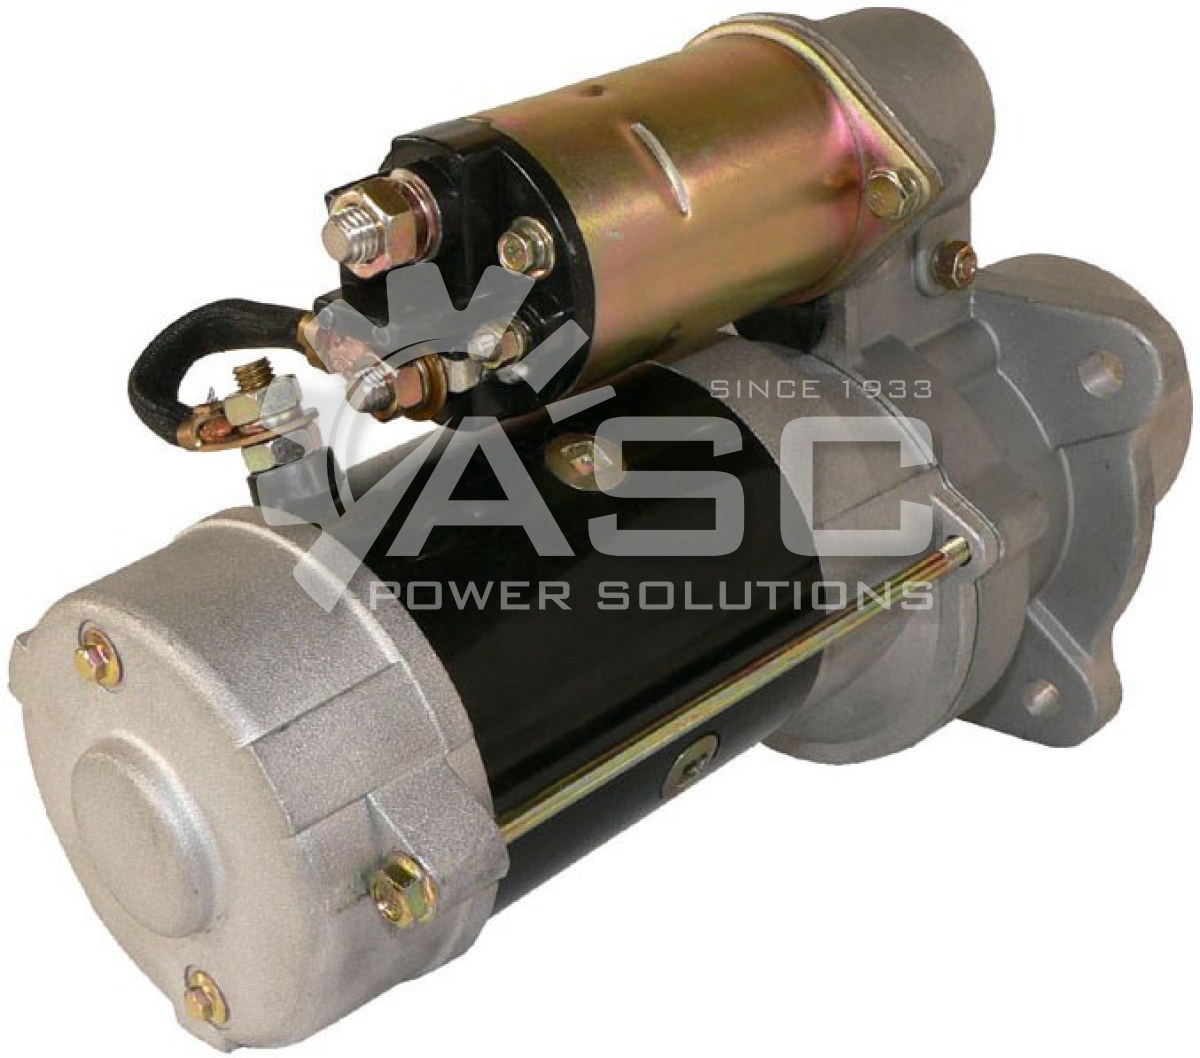 S122095_REMAN ASC POWER SOLUTIONS DELCO STARTER MOTOR FOR BOBCAT AND CLARK APPLICATIONS 12V 10 TOOTH CLOCKWISE ROTATION OFF SET GEAR REDUCTION (OSGR)